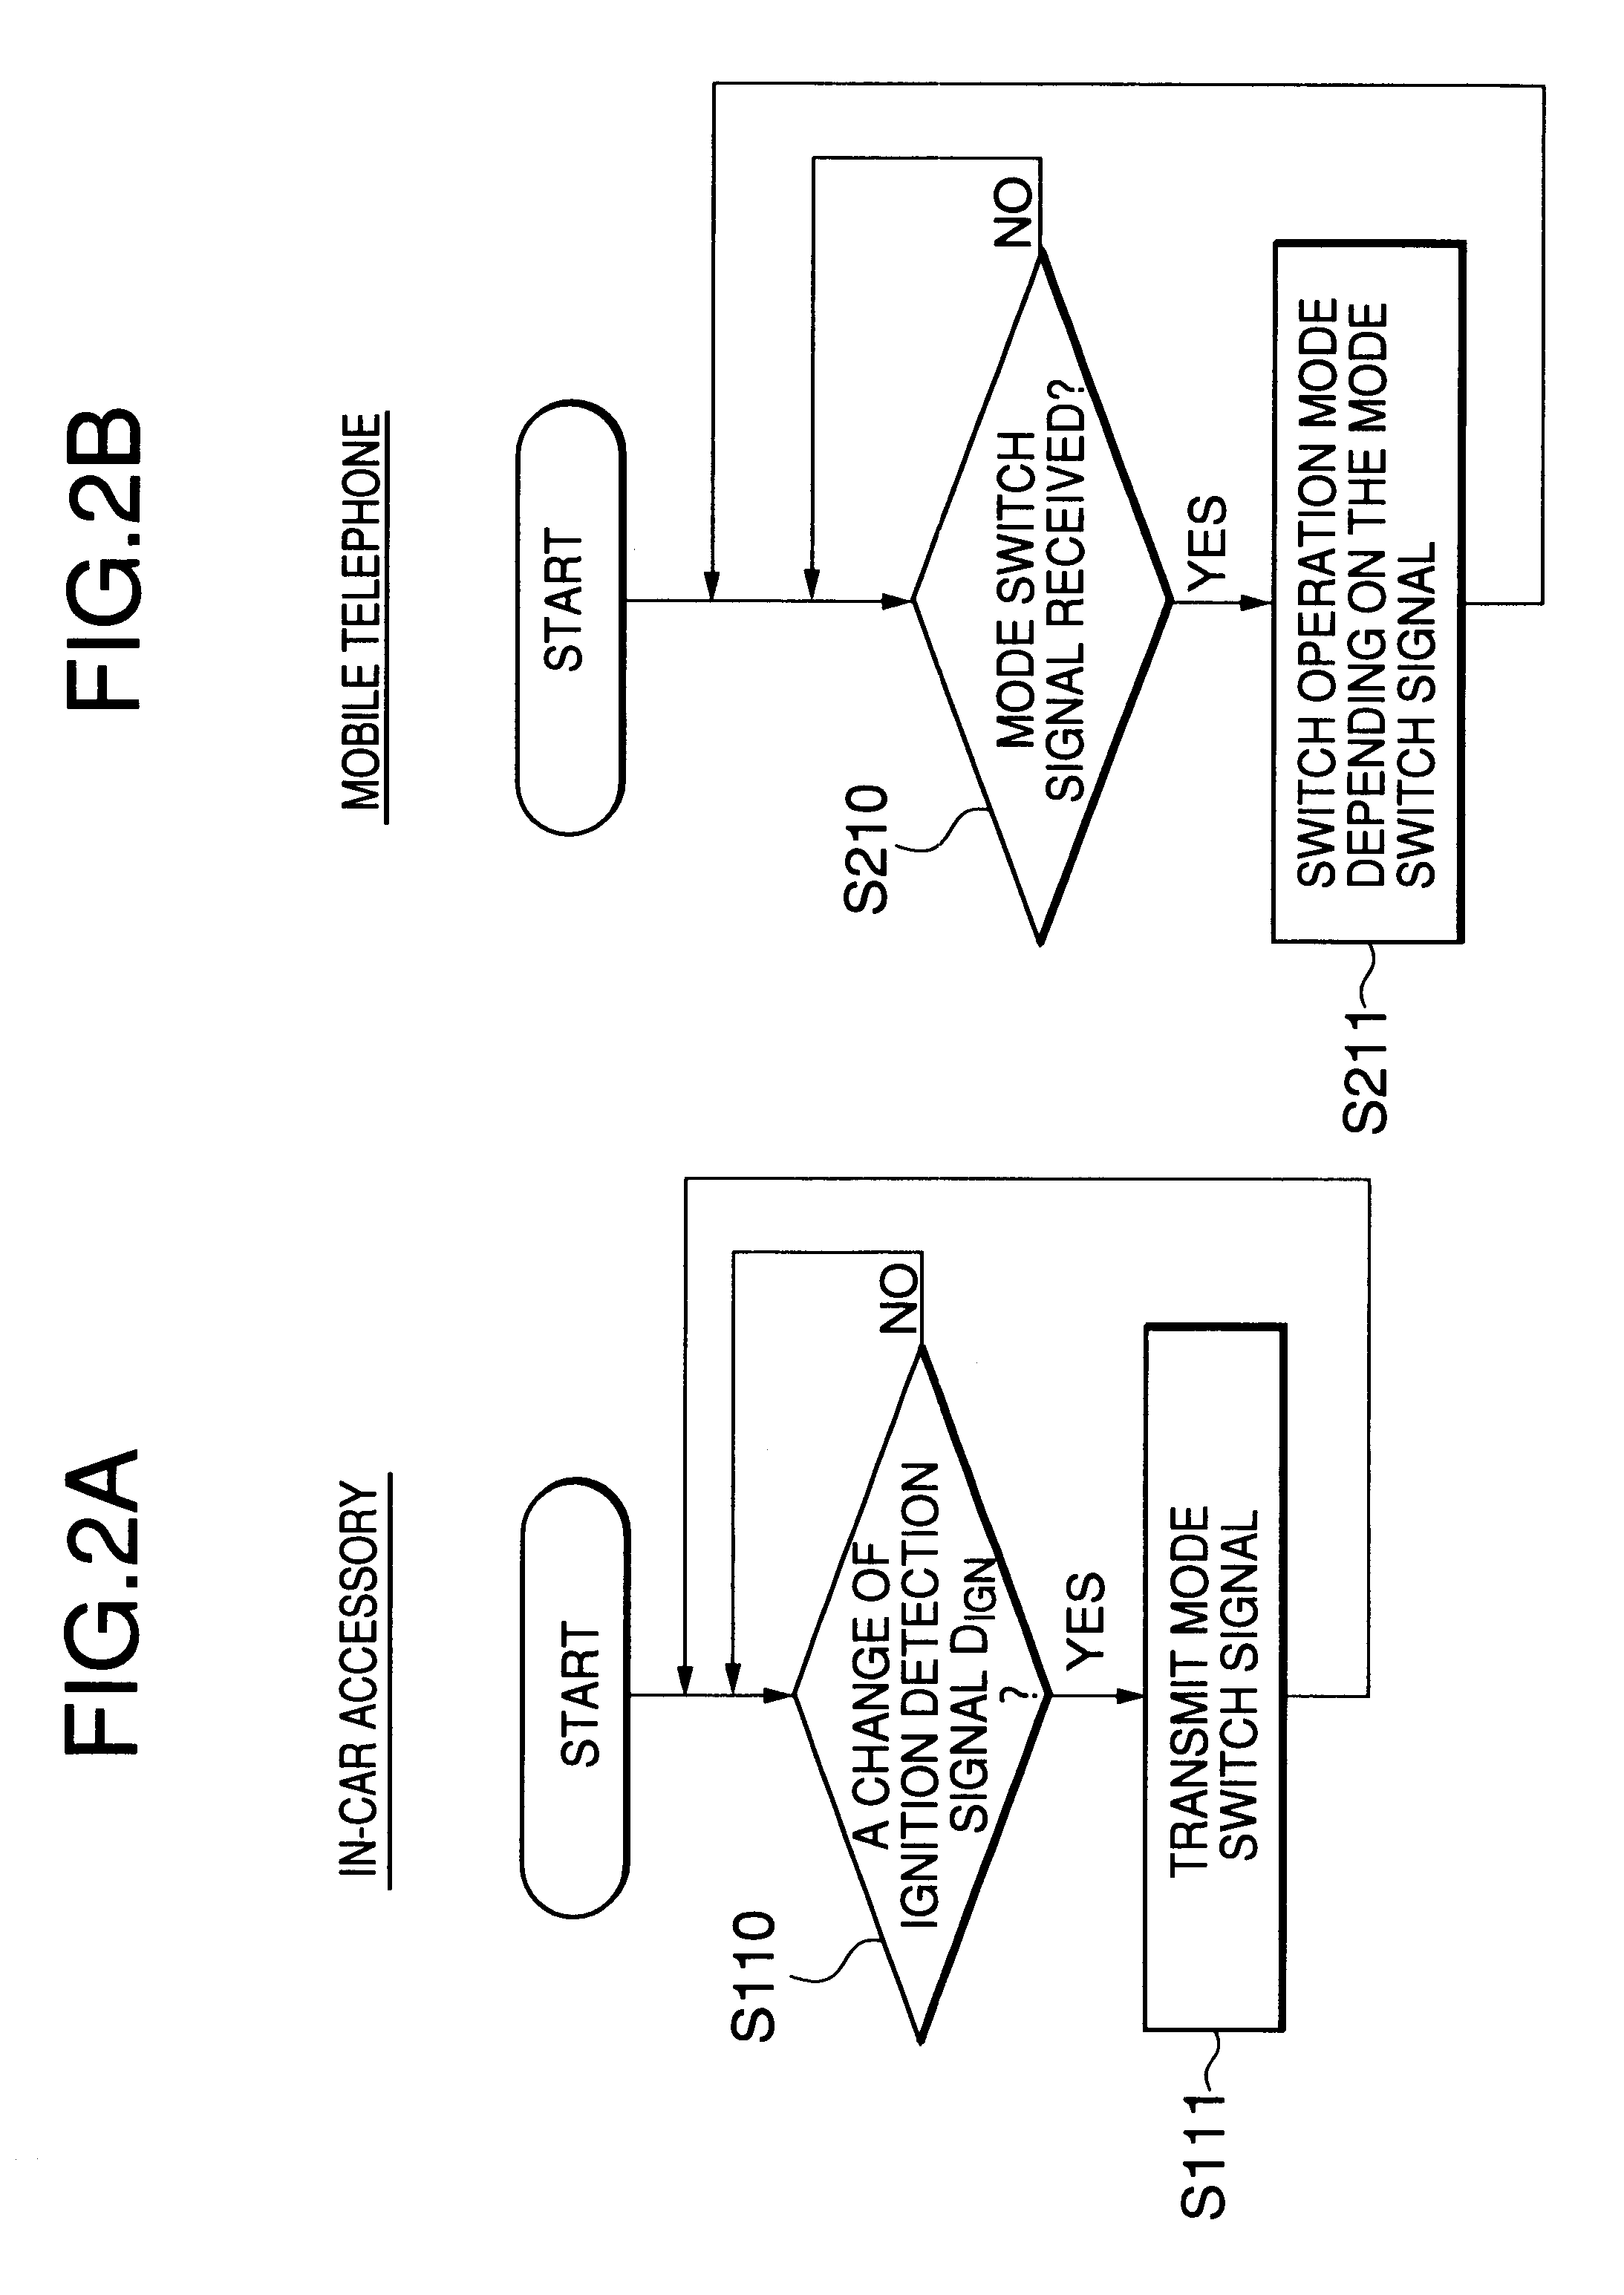 Radio telephone system within a vehicle with enhanced safety features